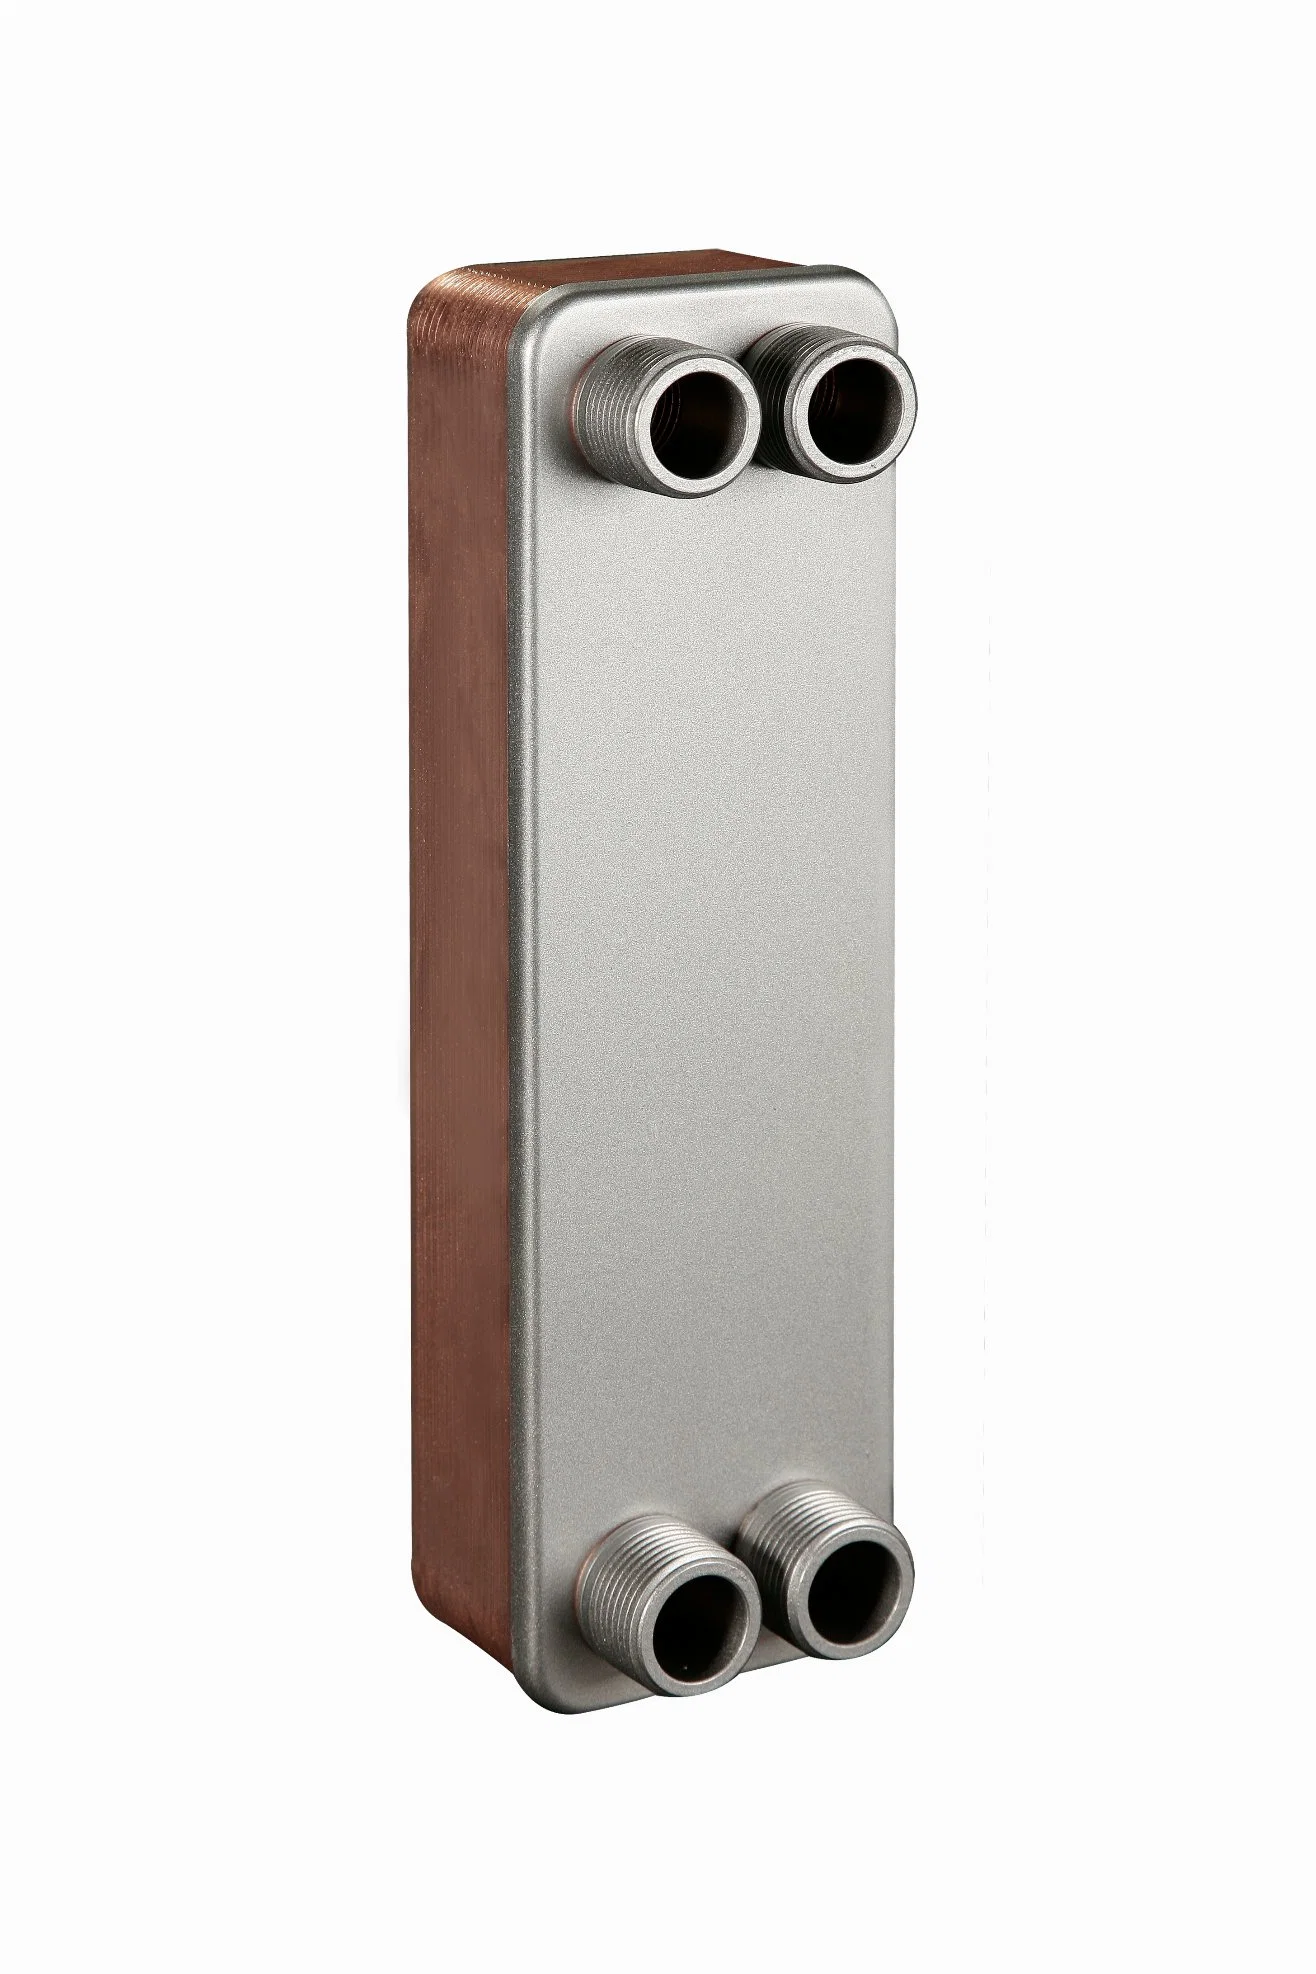 Brazed Type Heat Exchanger for Heating in Industry Use